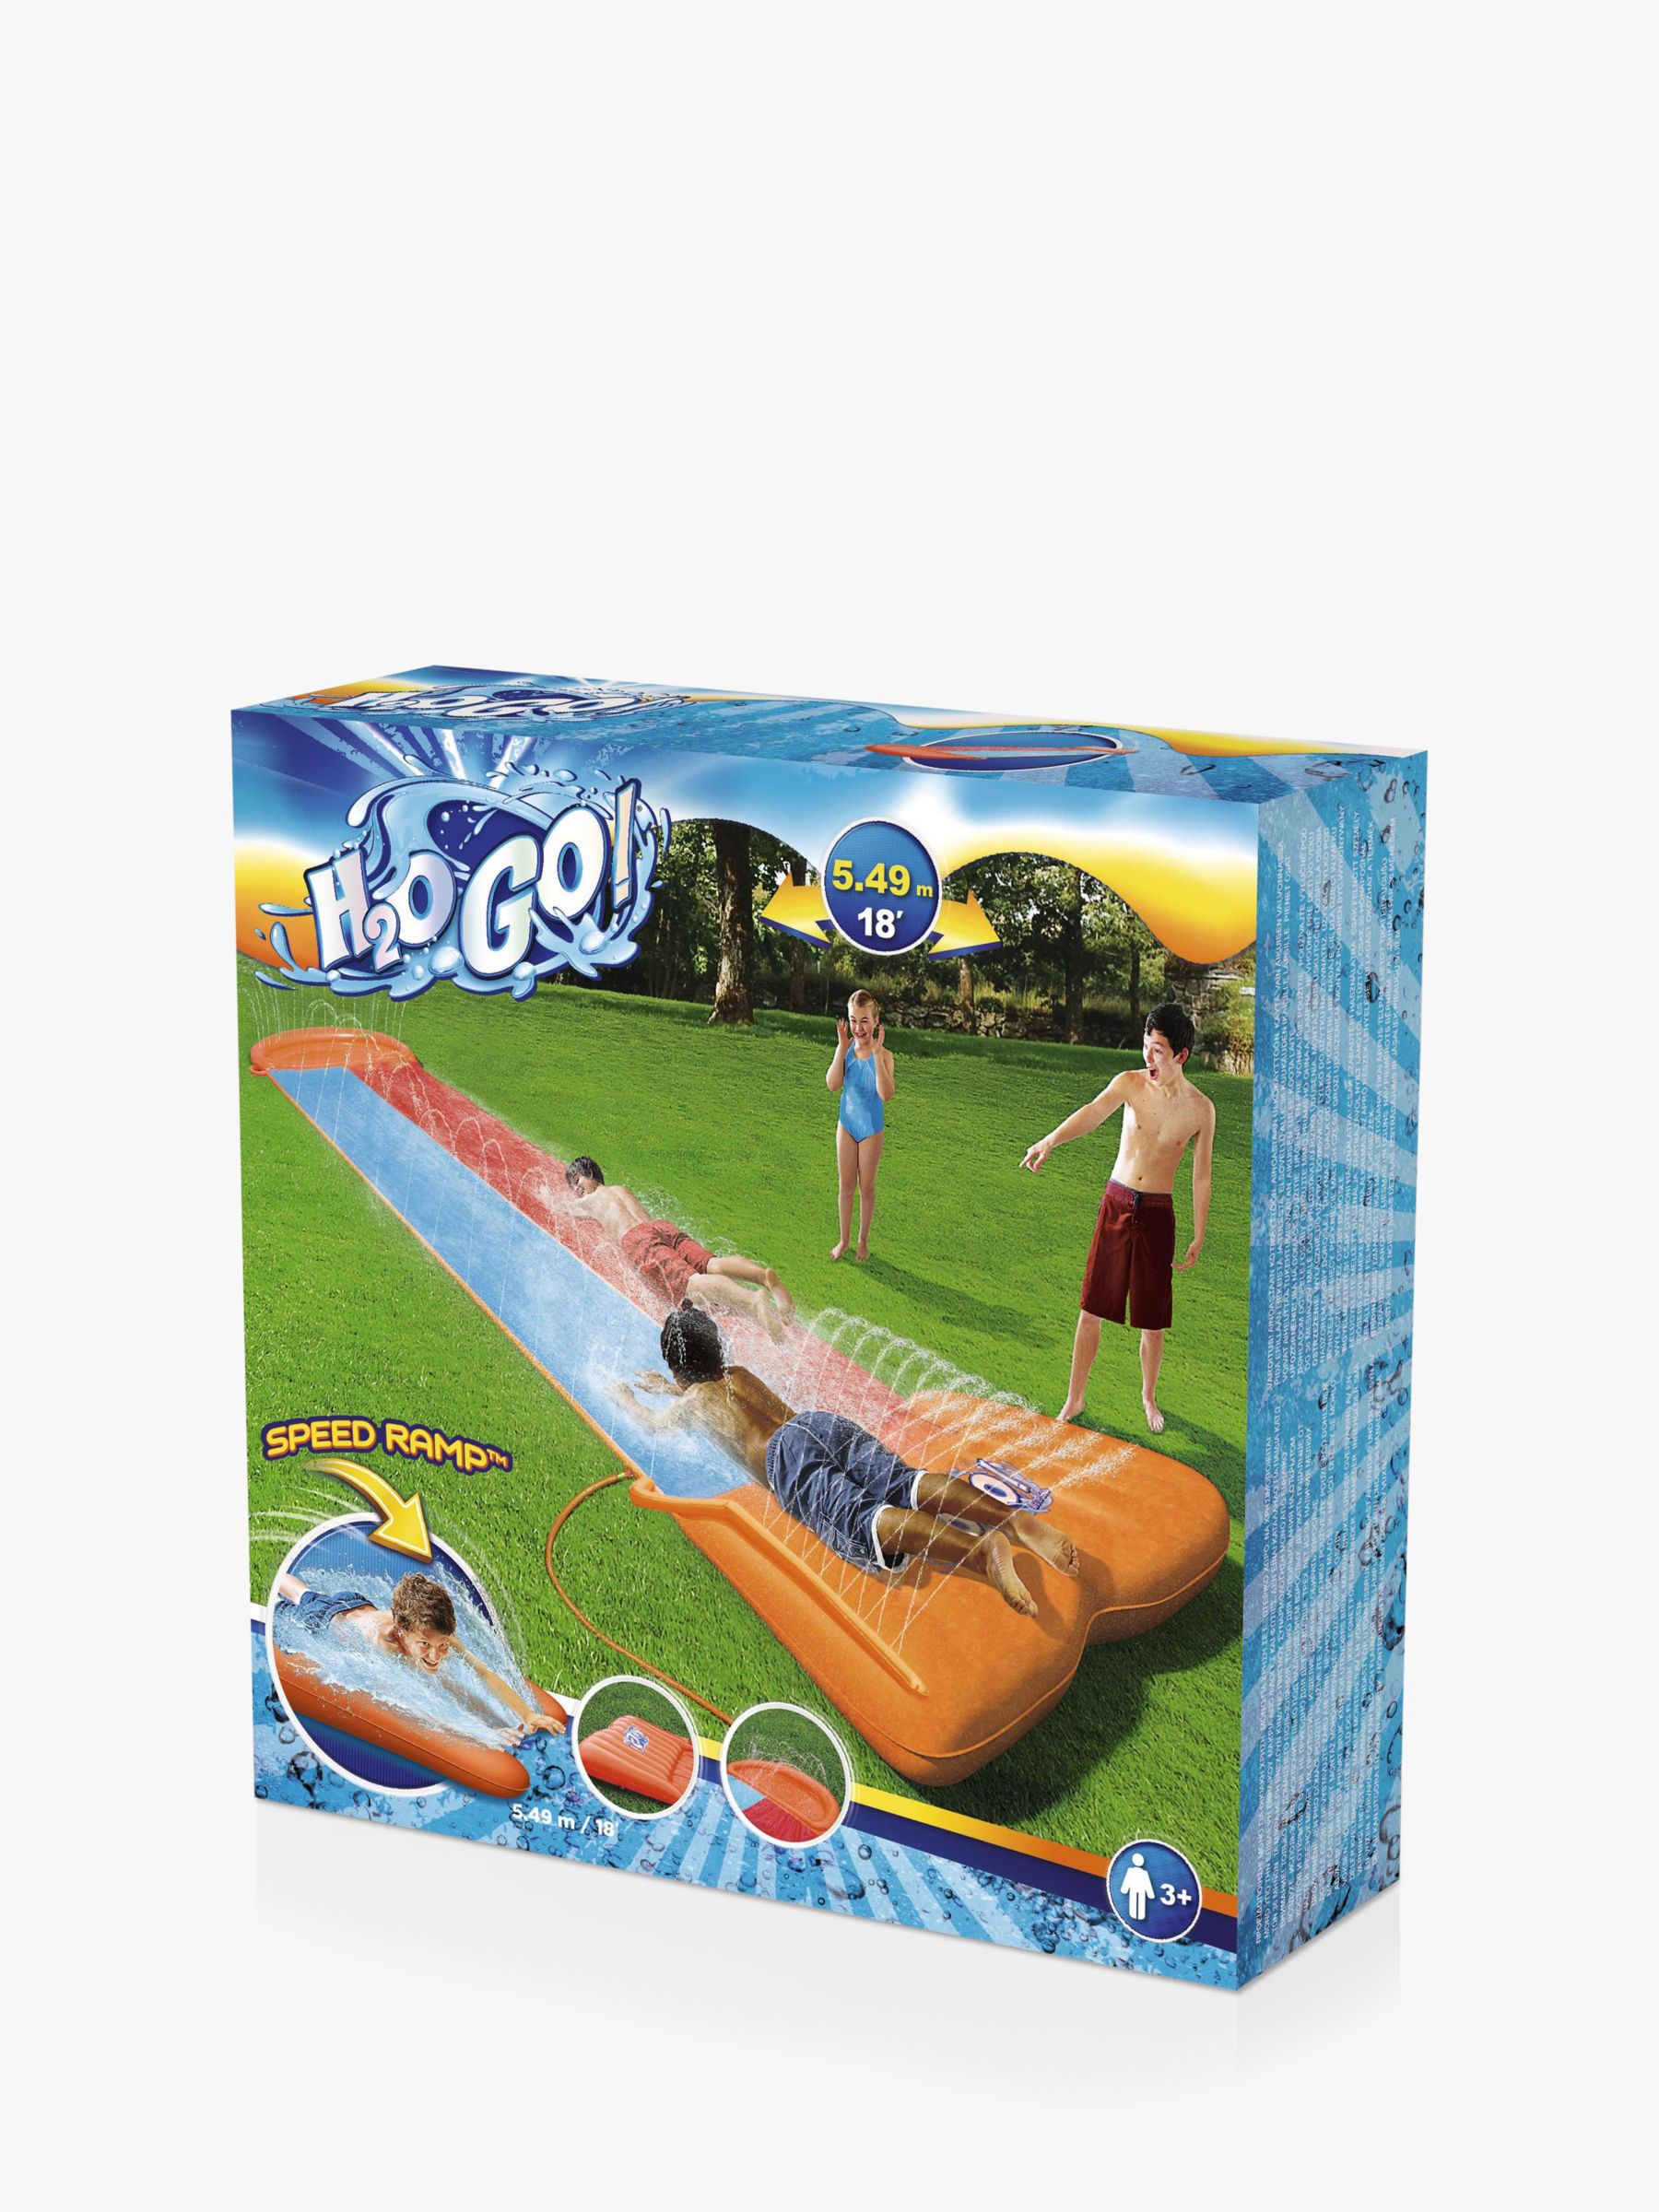 Bestway H2O Go! Double Slider Inflatable Water Slide